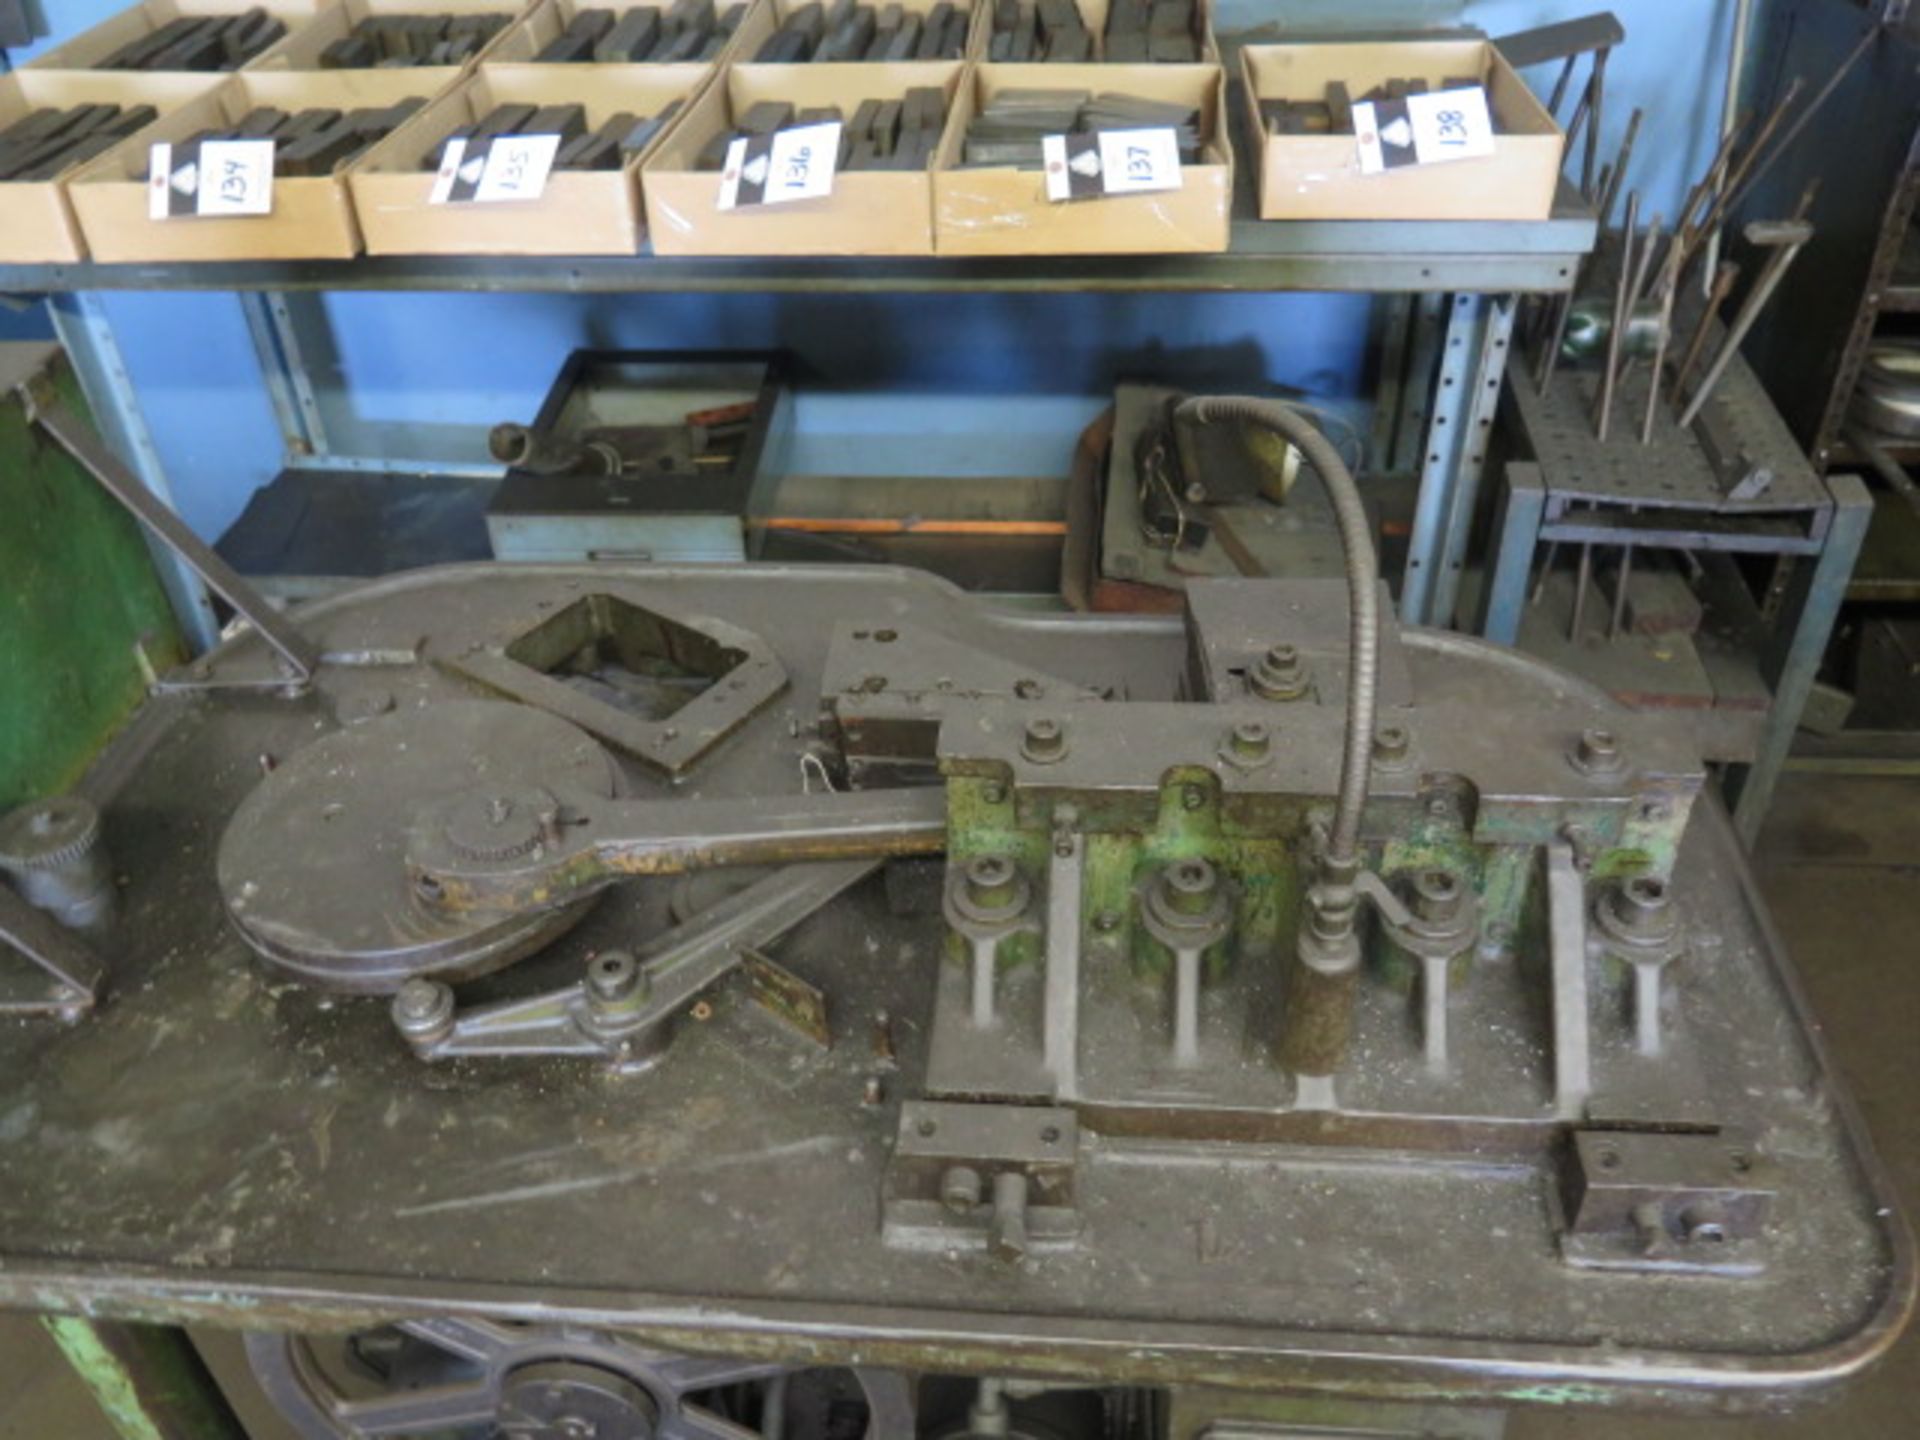 Waterbury Farrell No. 0 Thread Rolling Machine (SOLD AS-IS - NO WARRANTY) - Image 3 of 8